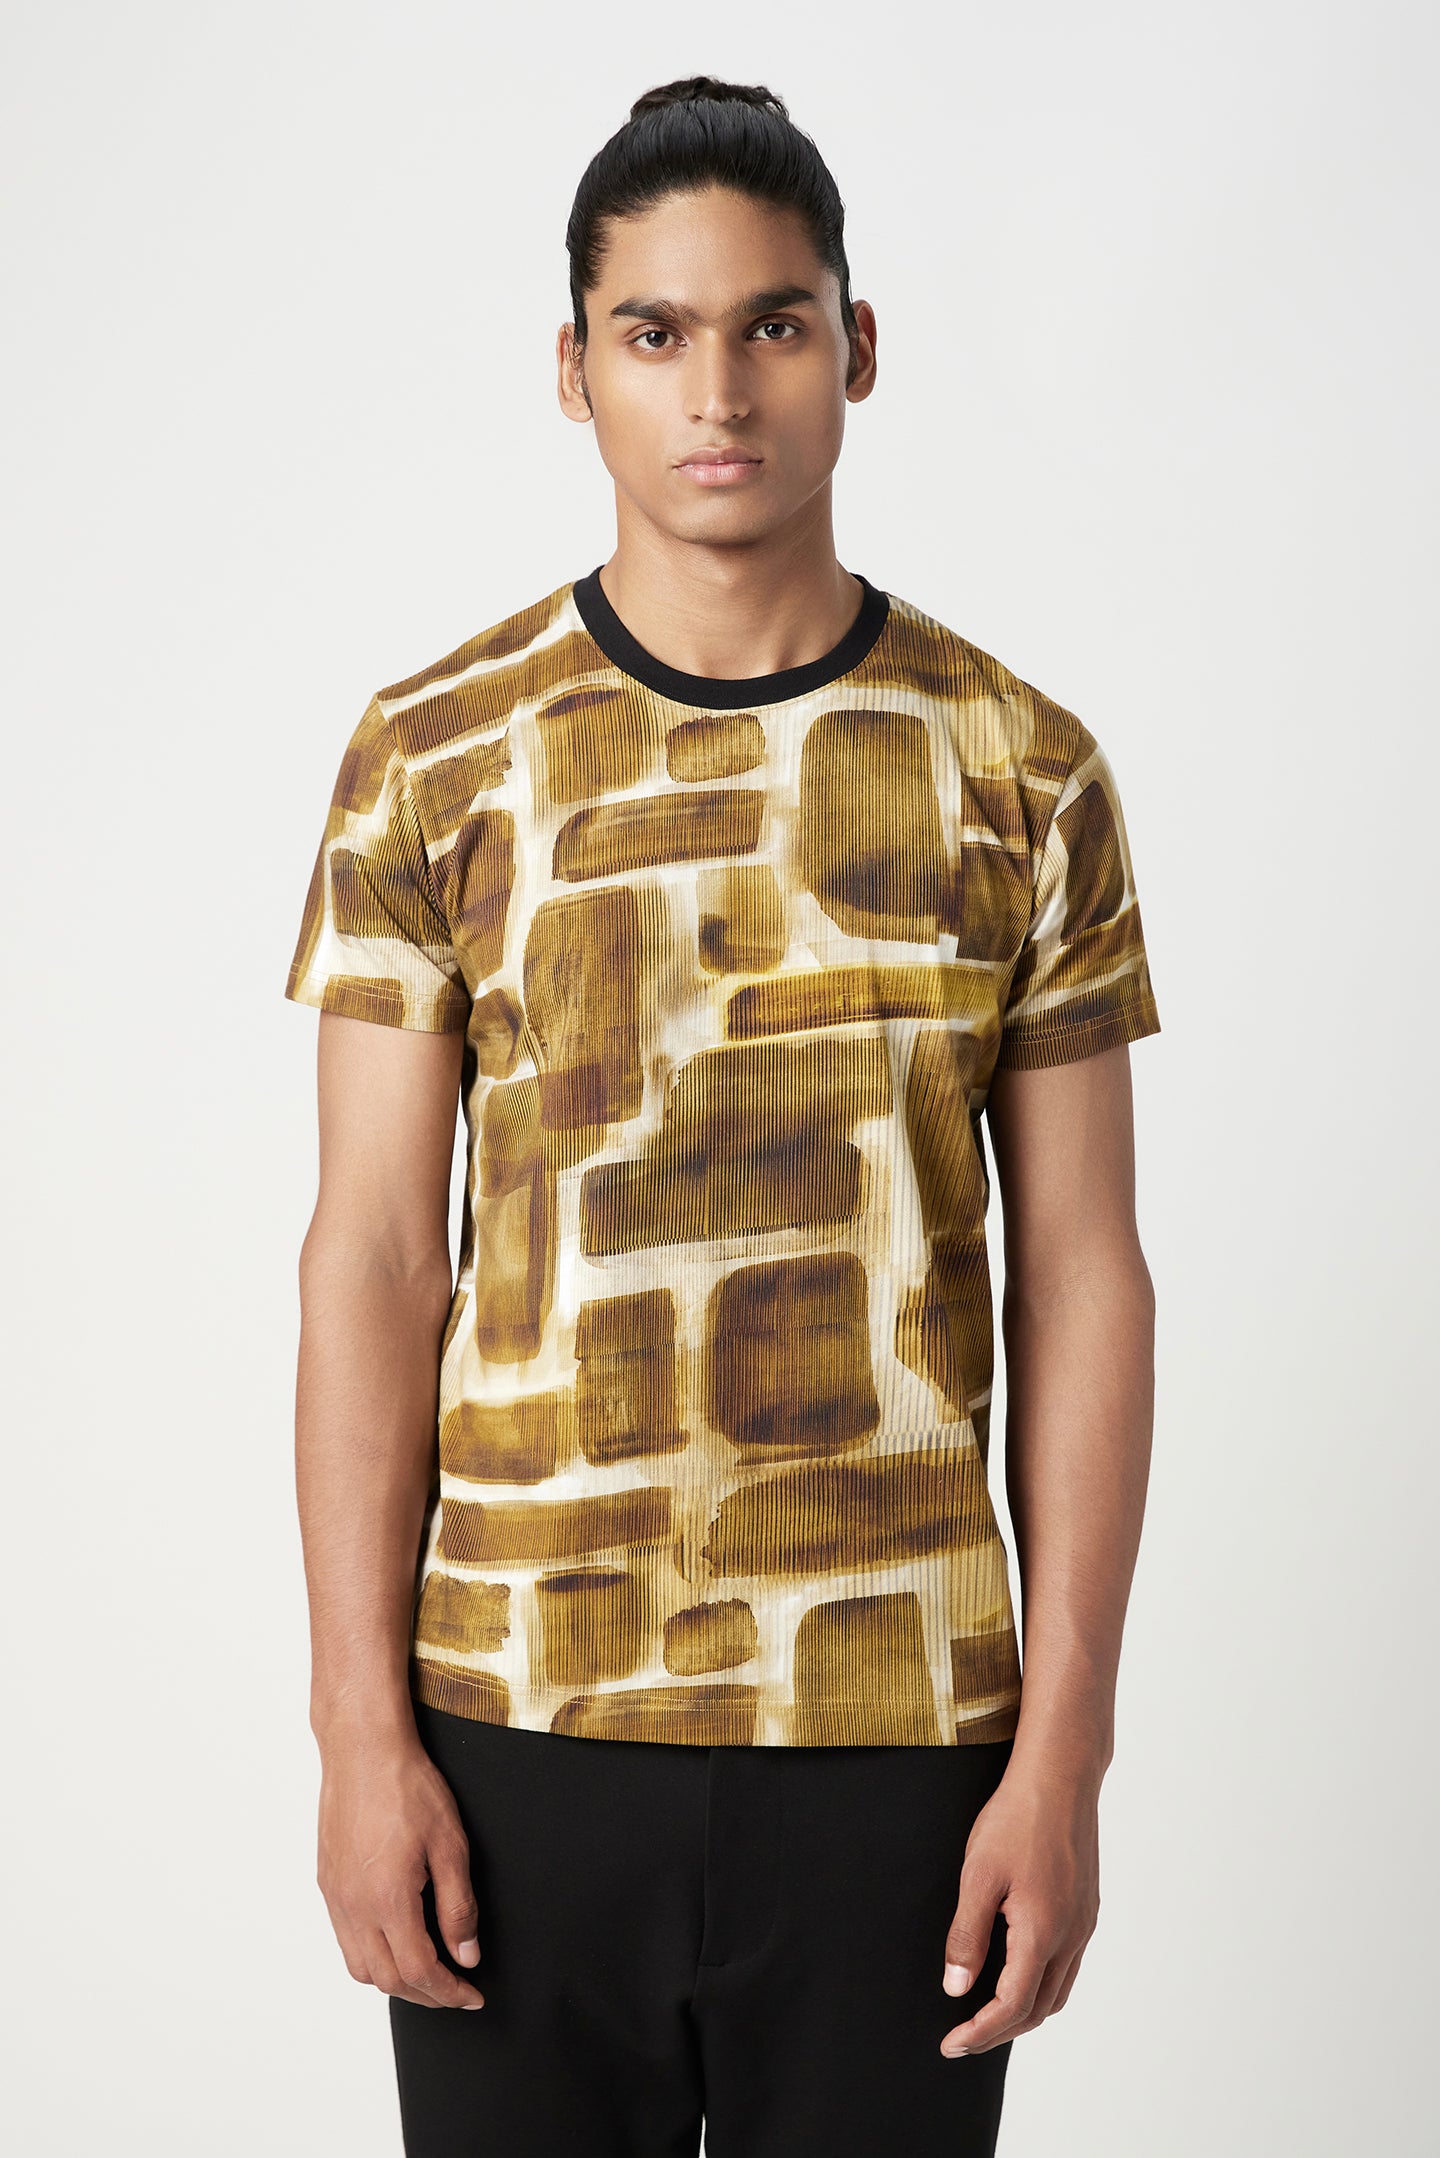 Regular Fit T-Shirt in All-Over Abstract Check Print